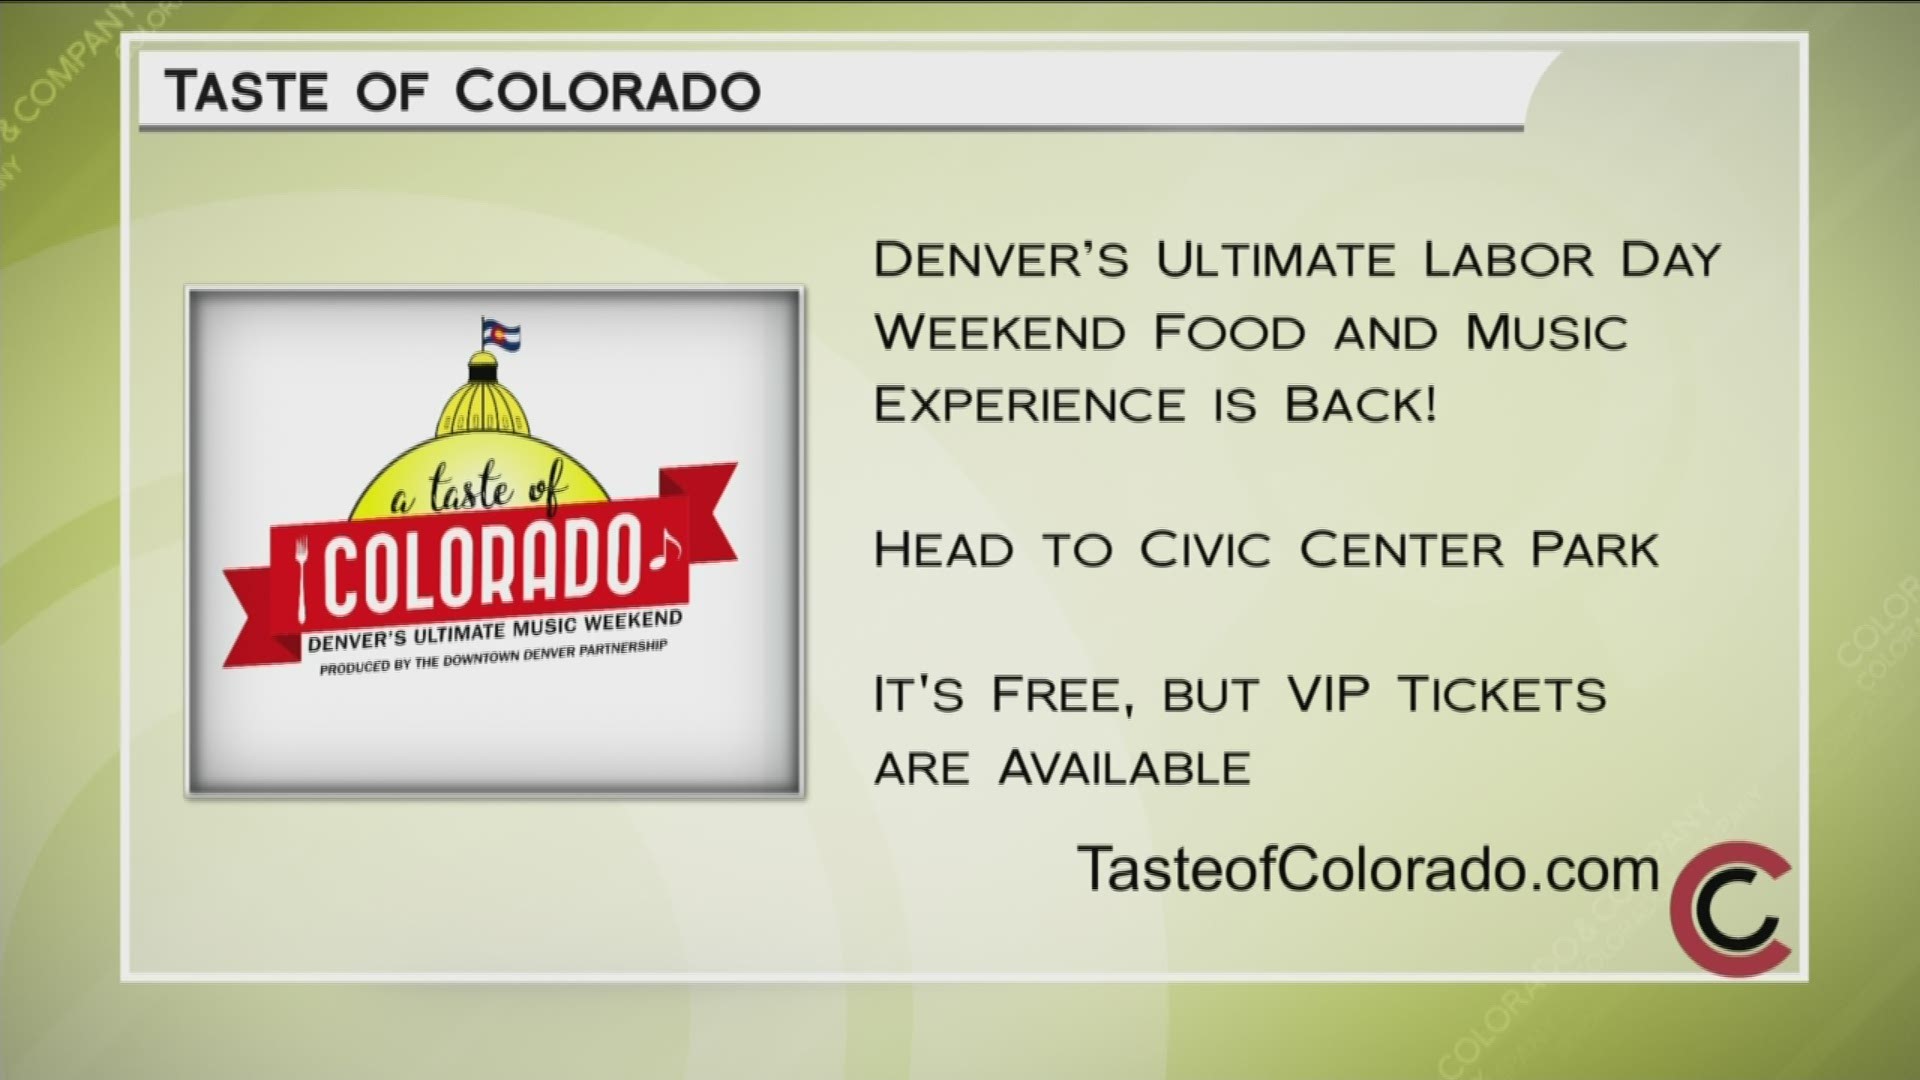 Eat your way through Colorado and never leave Denver! Don’t miss A Taste of Colorado. The event takes place at Civic Center Park and is free! VIP Tickets are available at www.ATasteOfColorado.com. Find a full lineup of vendors and performers online and get your tickets today!